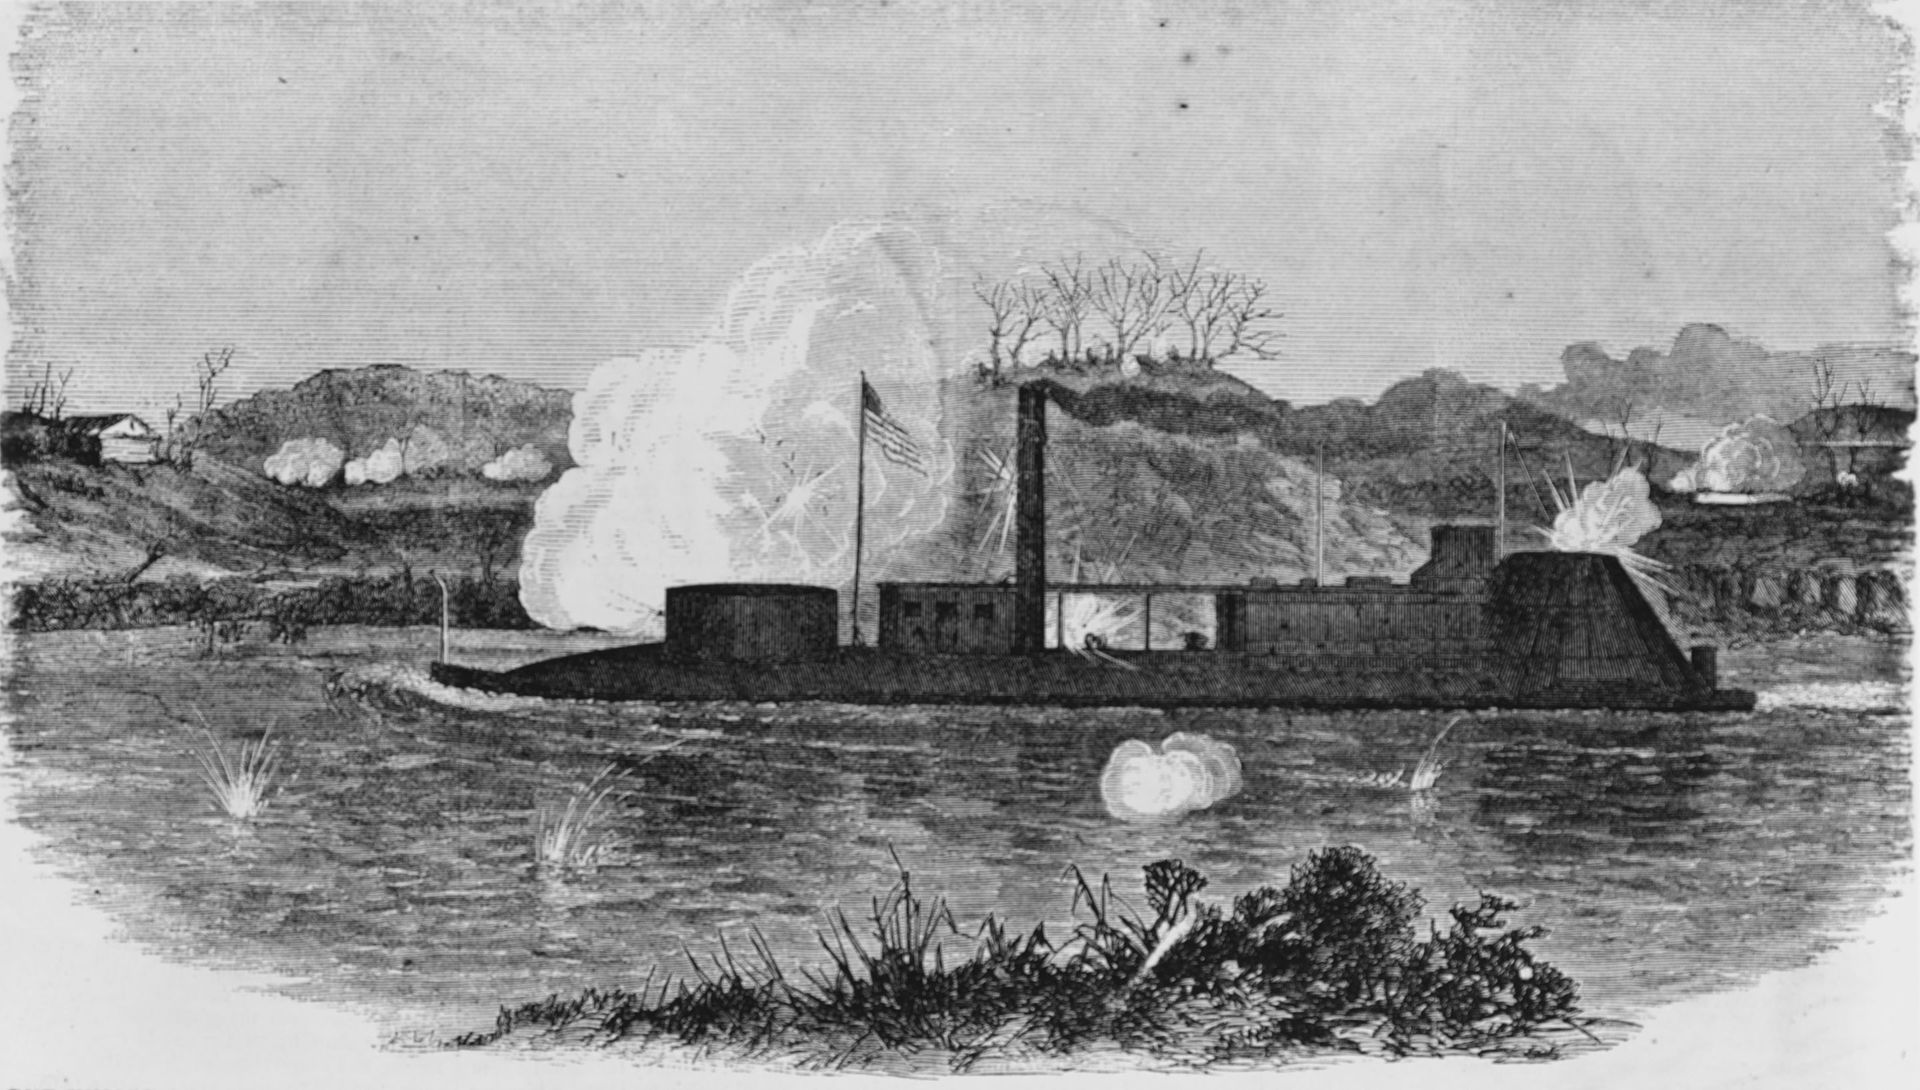 USS Neosho engaging Confederate Cannons on the North Bank of the Cumberland River, two of her sailors would receive Medals of Honor